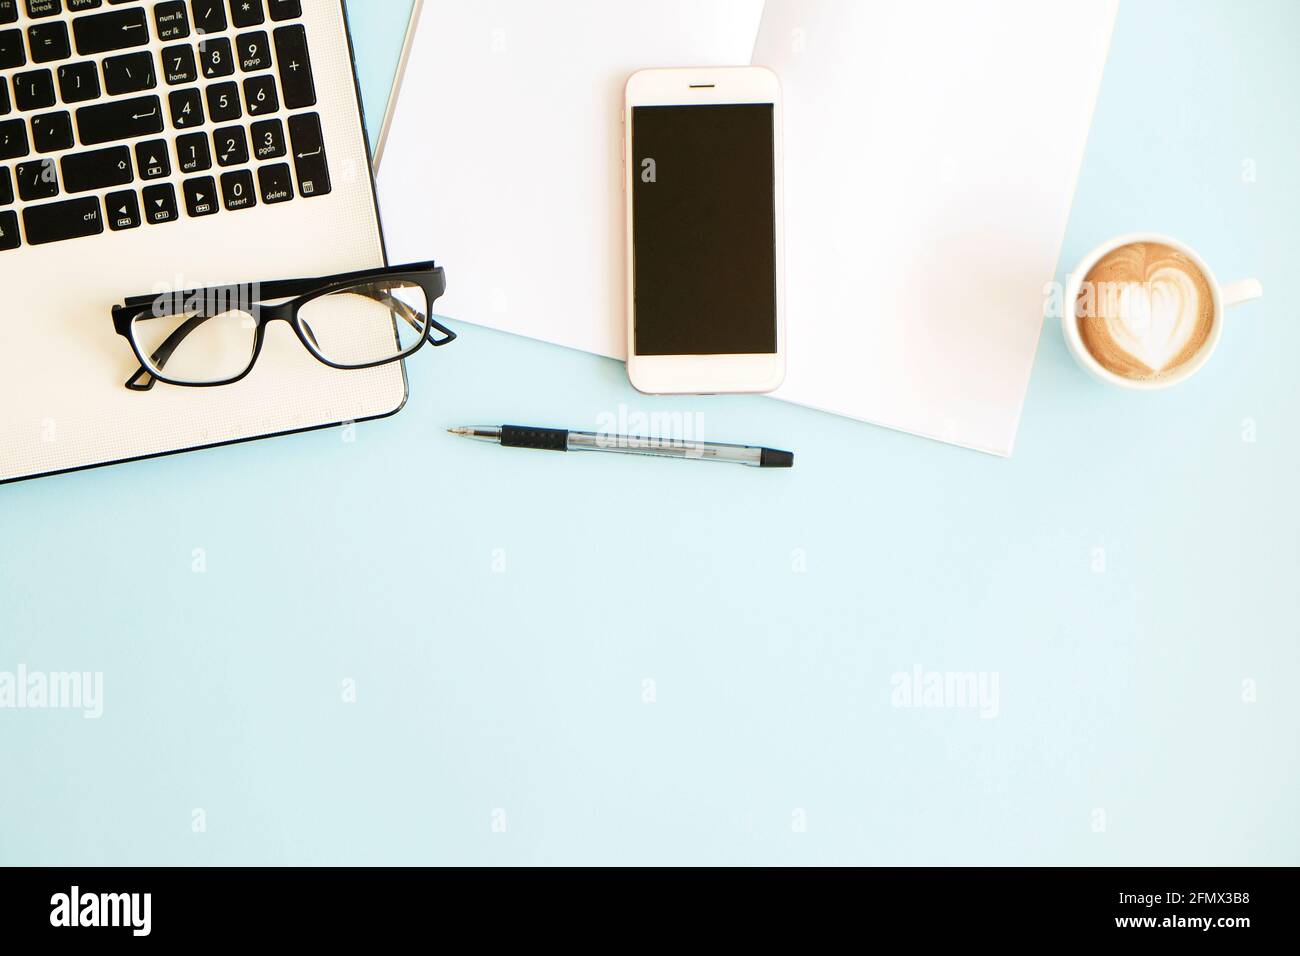 Minimalistic flat lay composition of black & white laptop computer keyboard, cell phone gadget, cup of coffee & folded glasses on blue surface desk ta Stock Photo